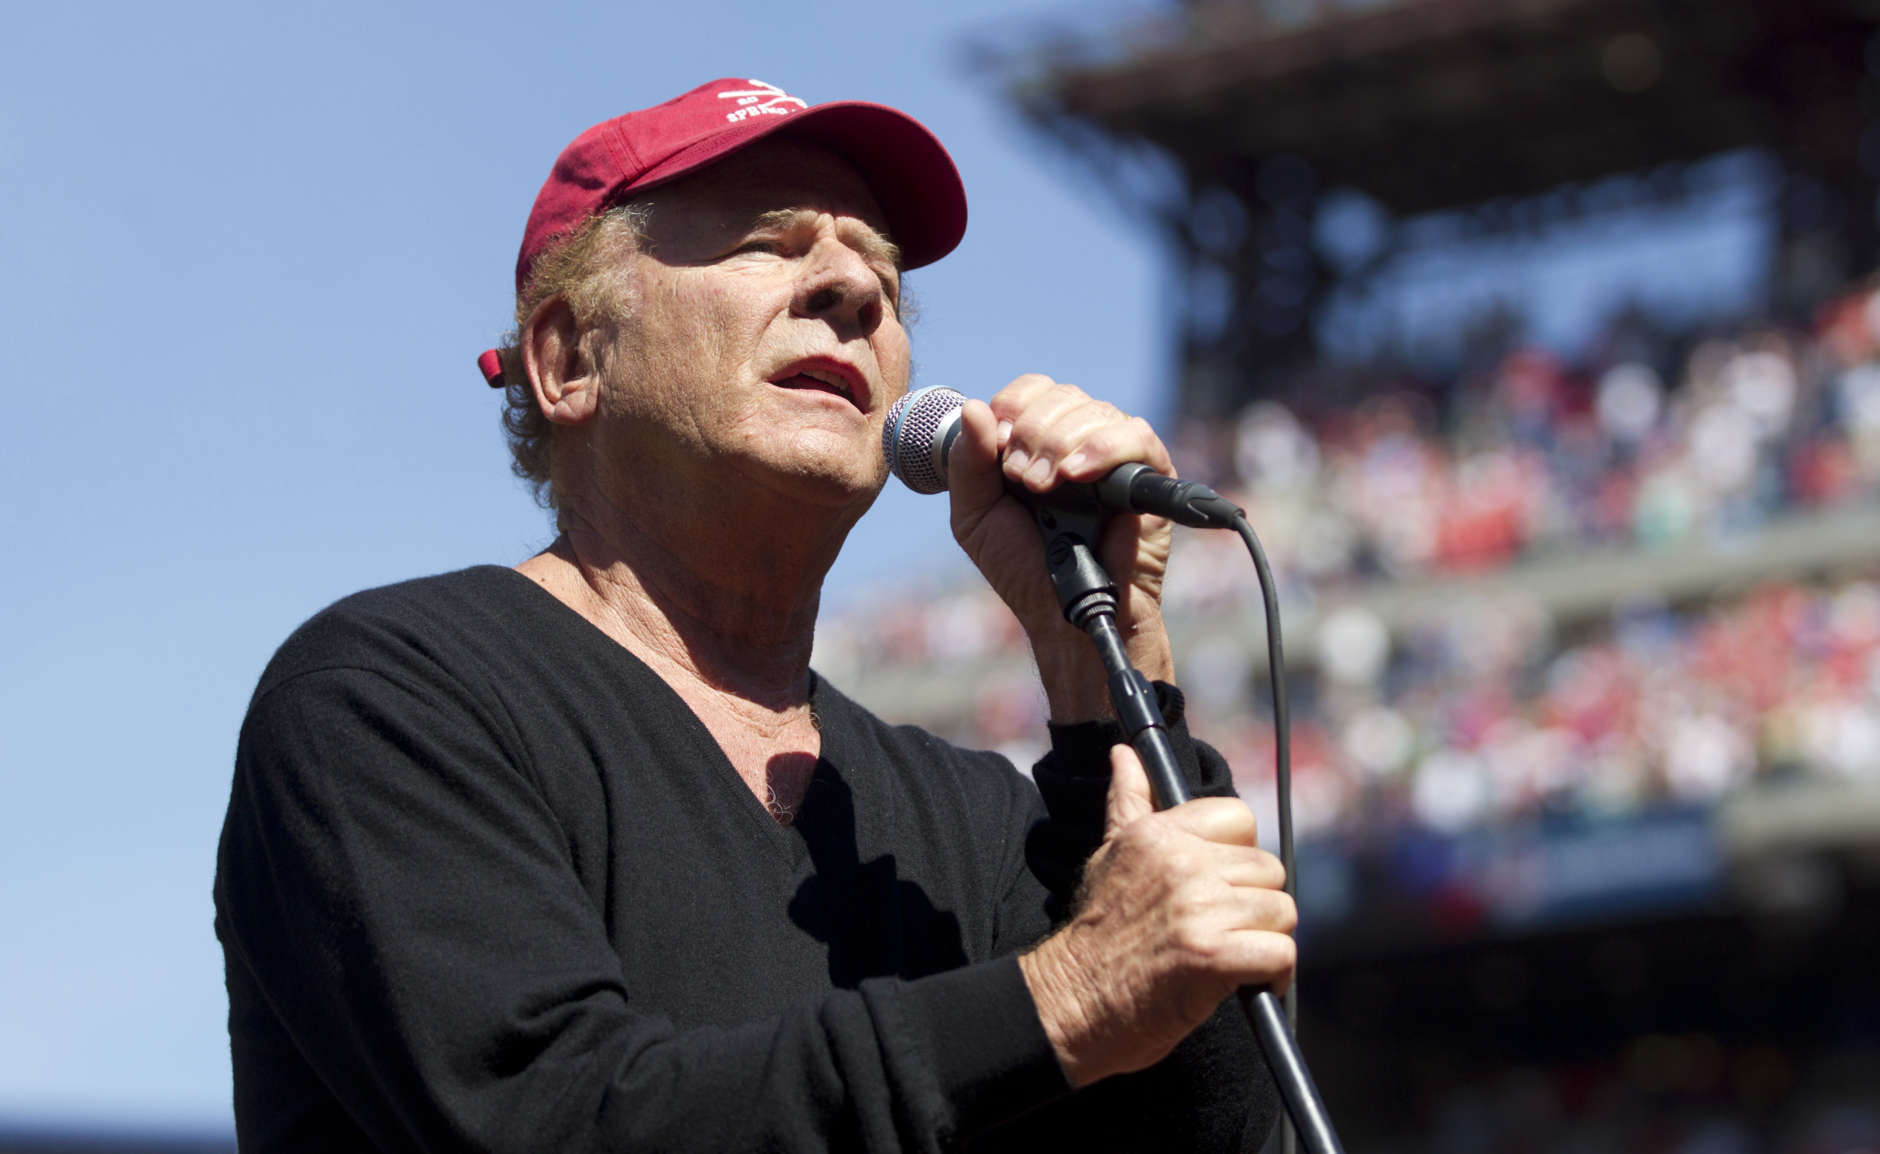 PHILADELPHIA, PA - JUNE 15: Grammy award winning singer Art Garfunkel sings 'God Bless America' in between the seventh inning of the game bewteen the Chicago Cubs and Philadelphia Phillies on June 15, 2014 at Citizens Bank Park in Philadelphia, Pennsylvania. (Photo by Mitchell Leff/Getty Images)